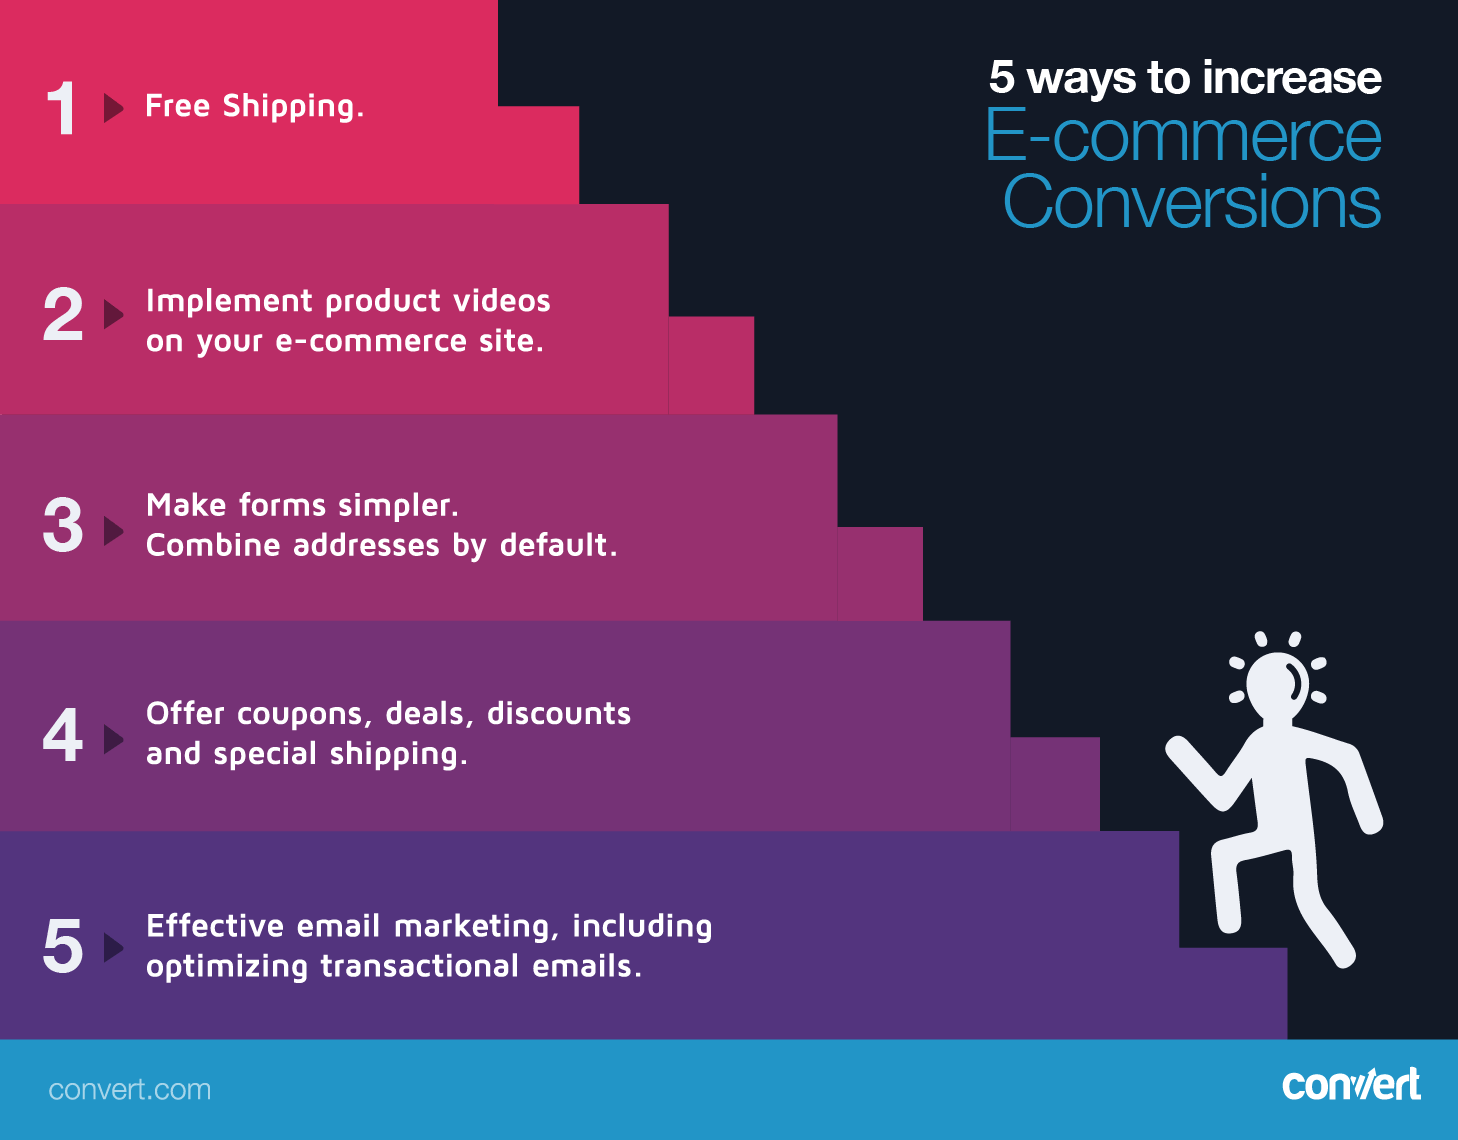 5 ways to increase e-commerce conversions-01